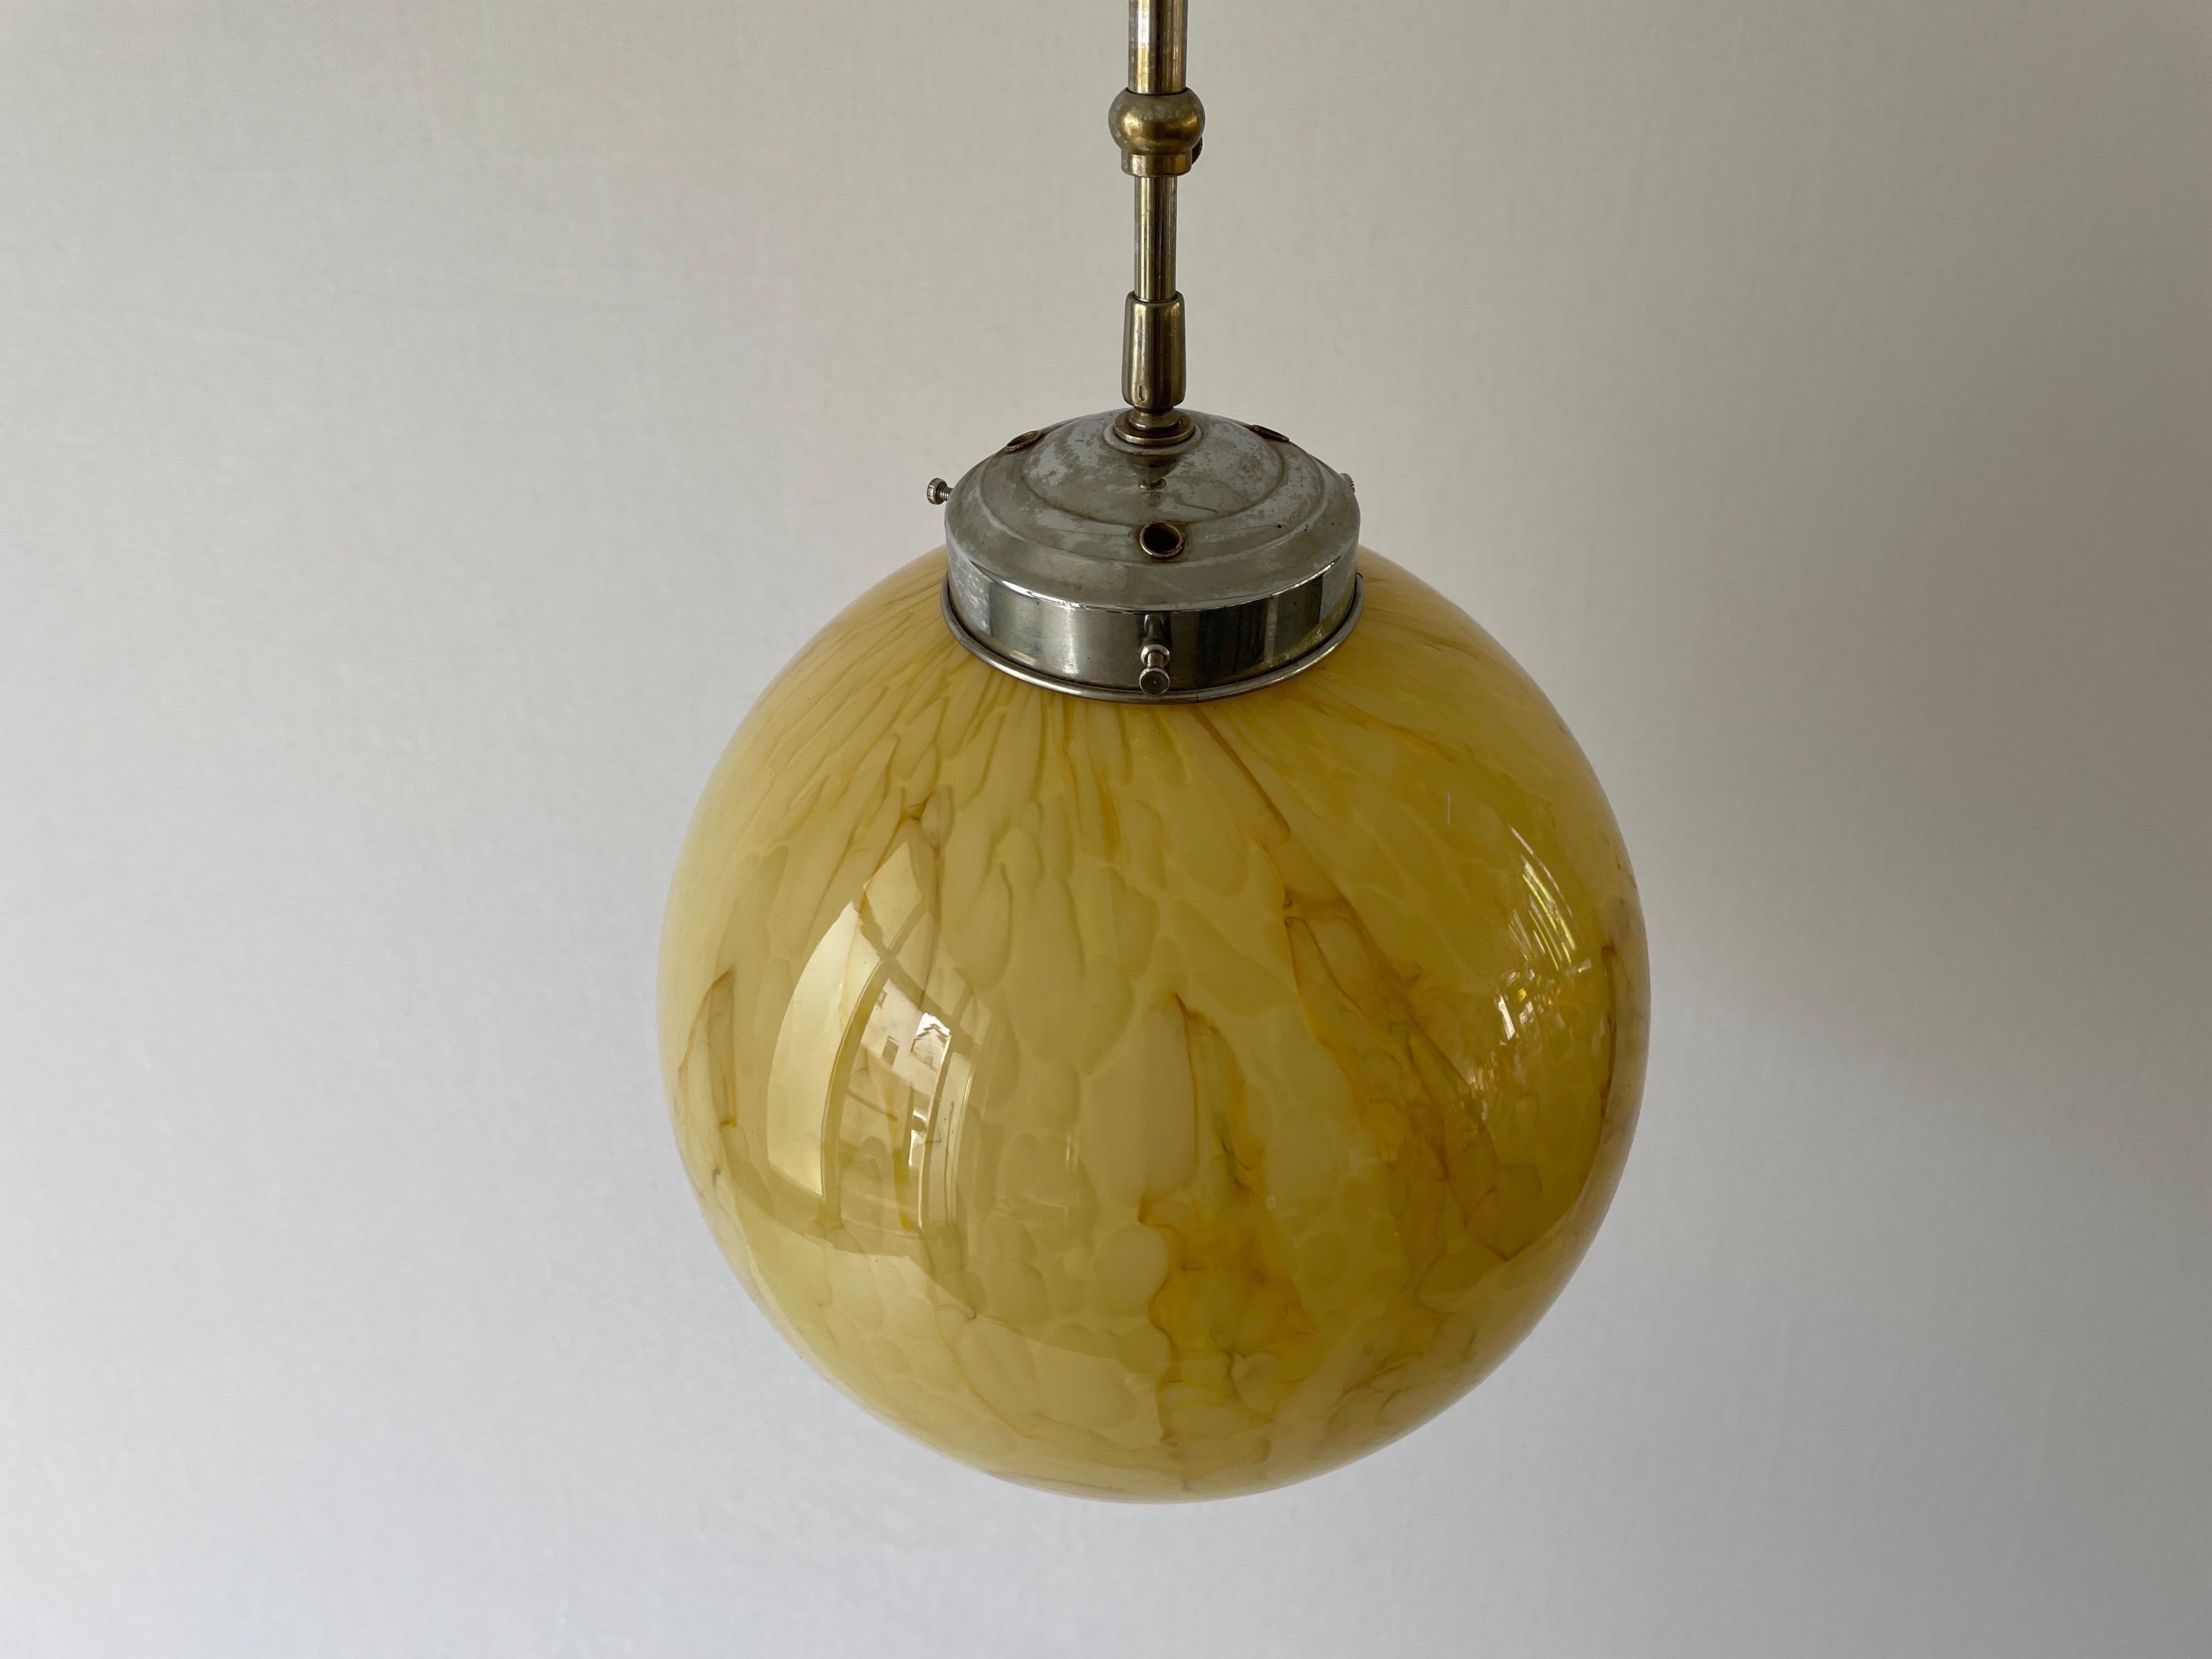 Art Deco Exceptional Church Lamp with Yellow Glass Ball , 1930s, Germany

This lamp works with E27 light bulb.

Movable shade - The shade can be moved with the help of the piece on the stick

Measurements: 
Height: 98 cm
Shade diameter: 28 cm


